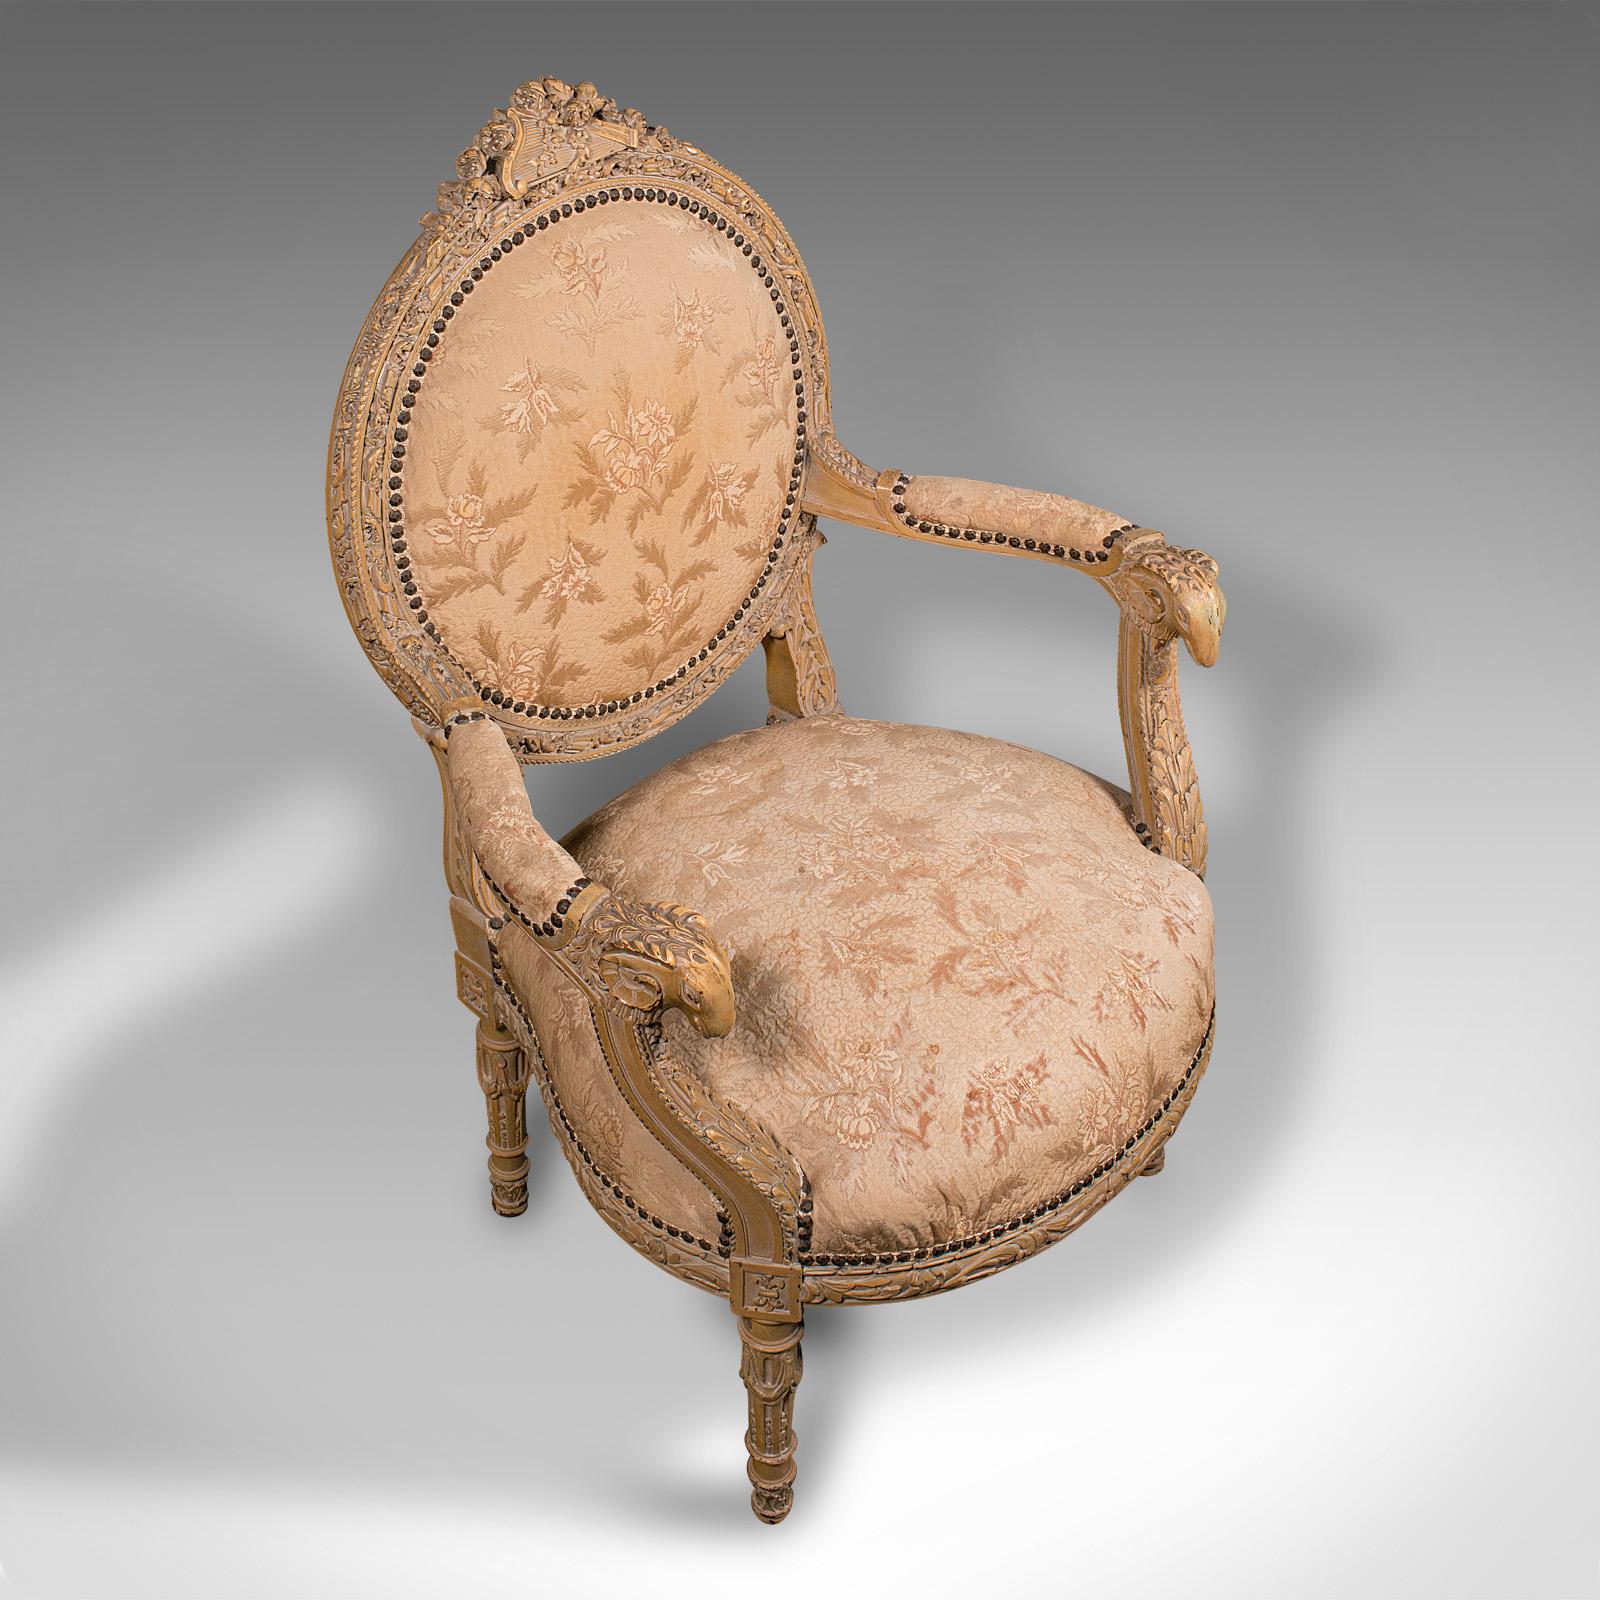 Antique Carved Armchair, French, Show Frame, Fauteuil Chair, Victorian, C.1870 For Sale 1